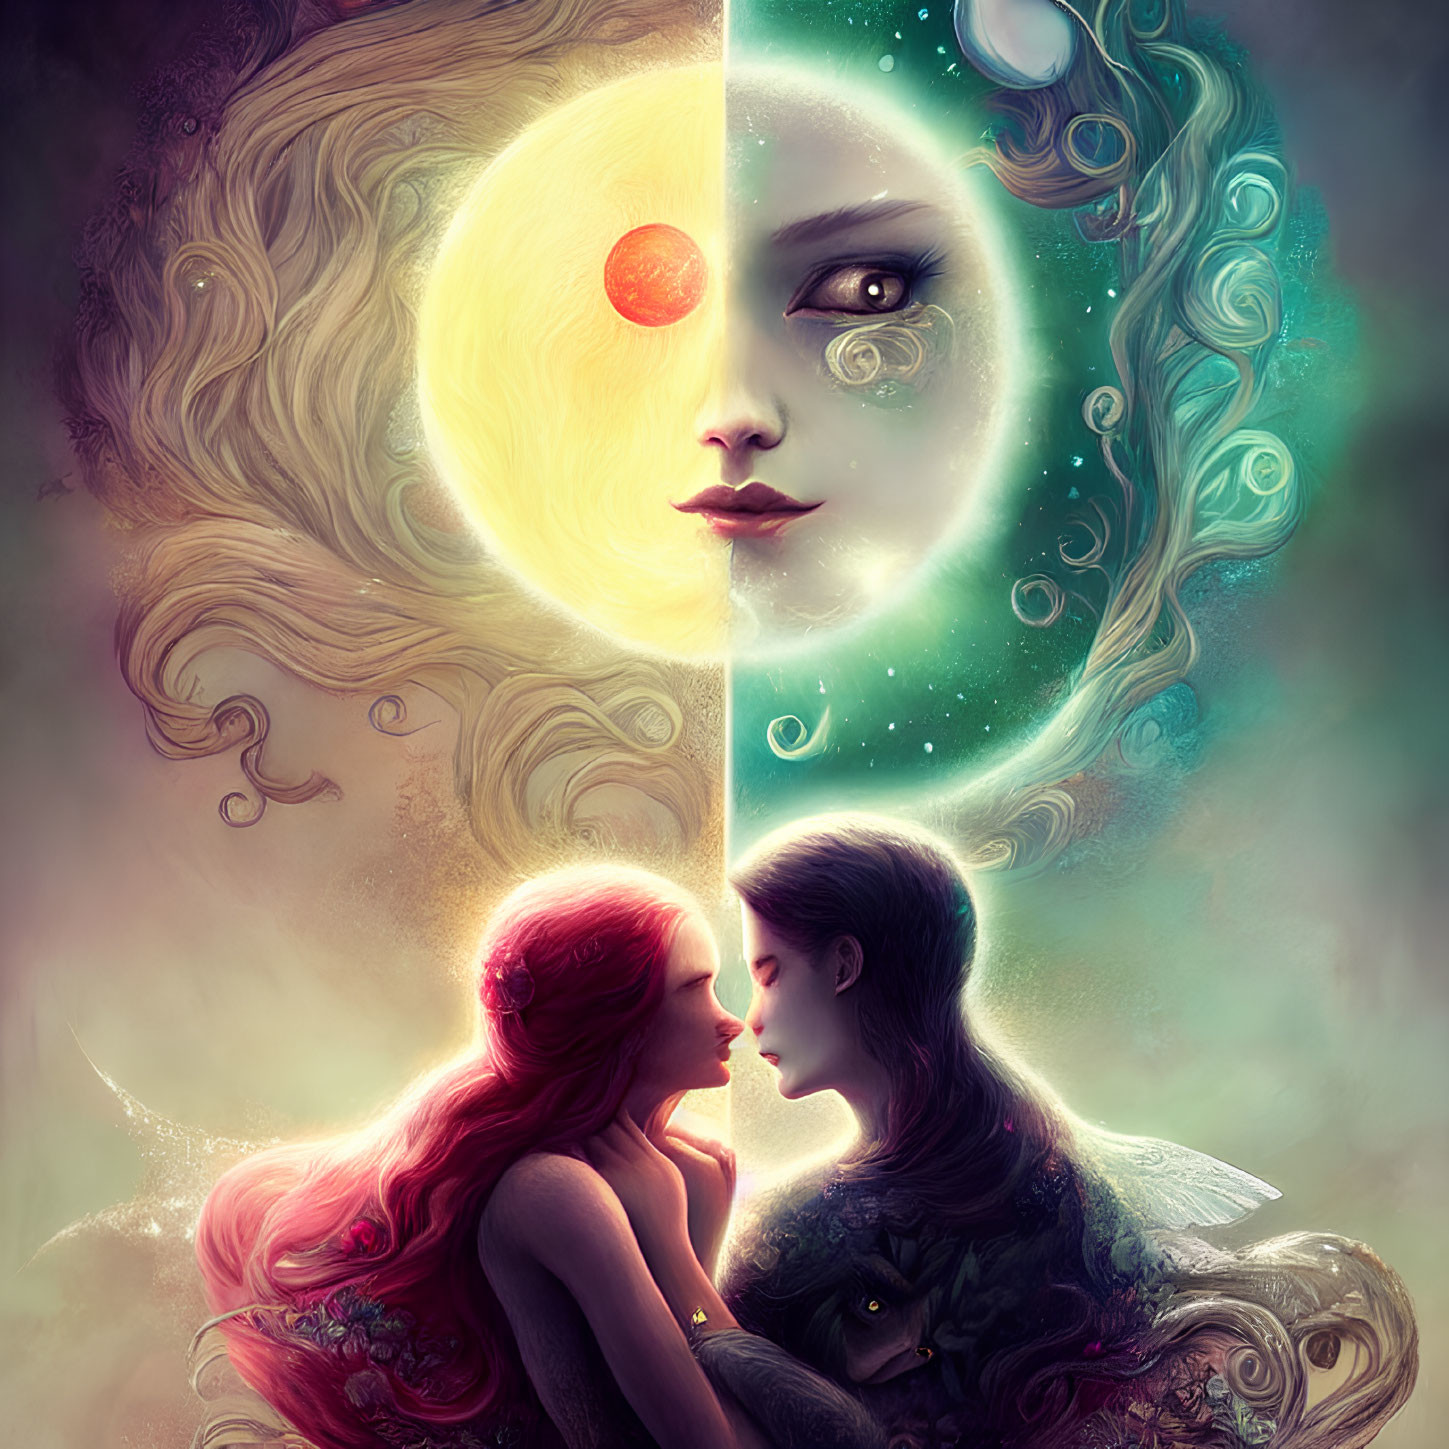 Ethereal figures embrace under sun and moon visage in cosmic dance